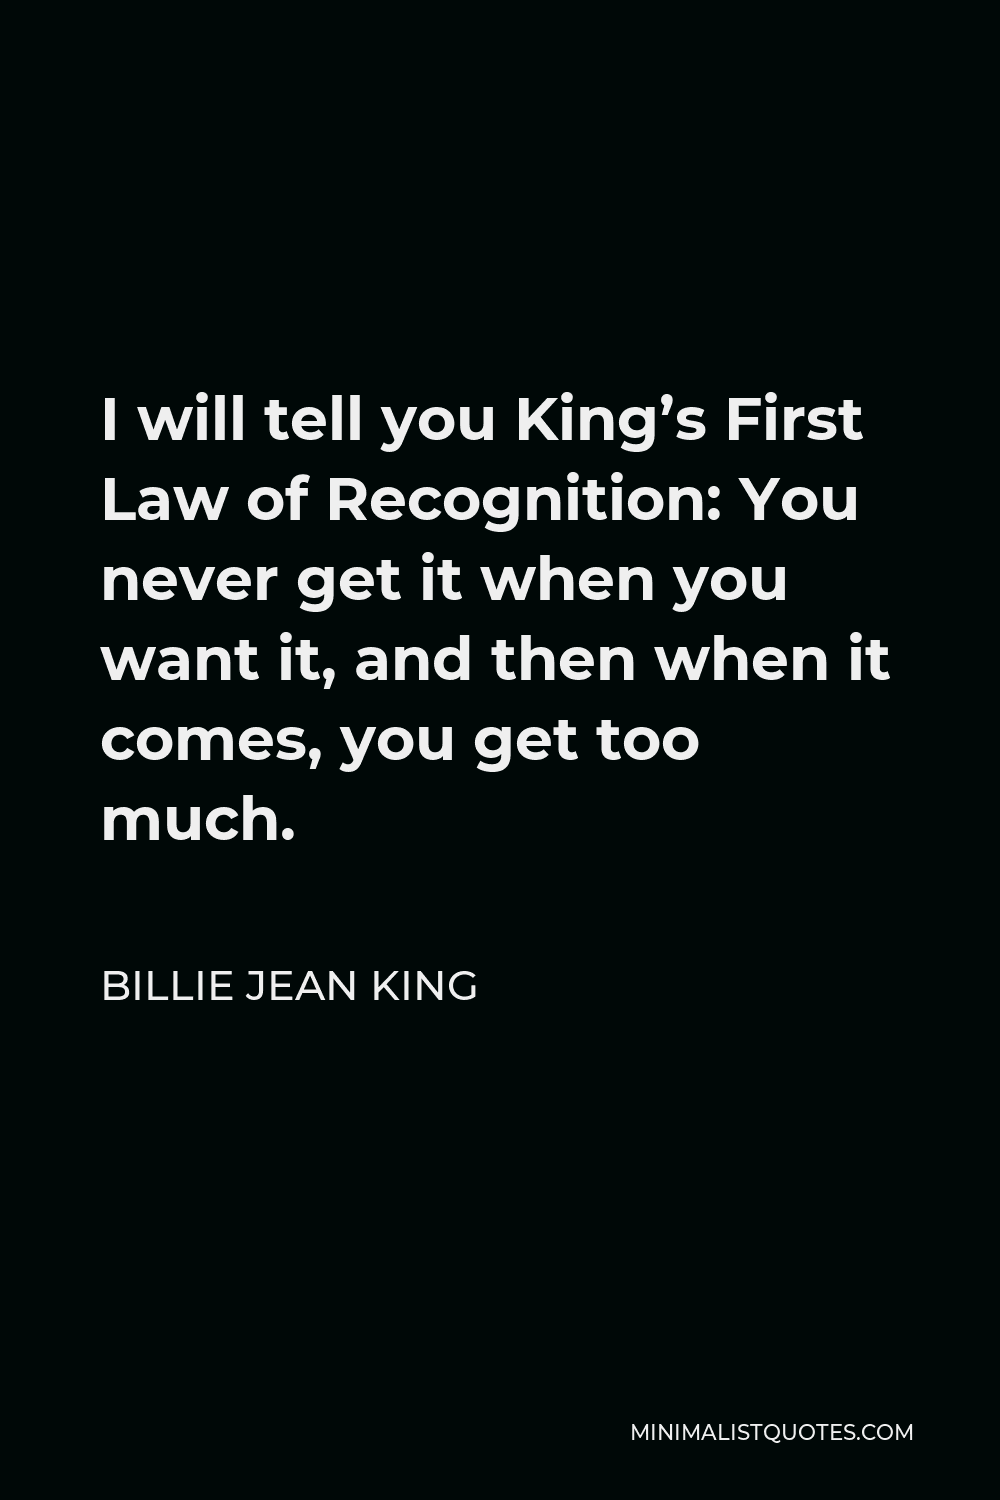 Billie Jean King Quote - I will tell you King’s First Law of Recognition: You never get it when you want it, and then when it comes, you get too much.